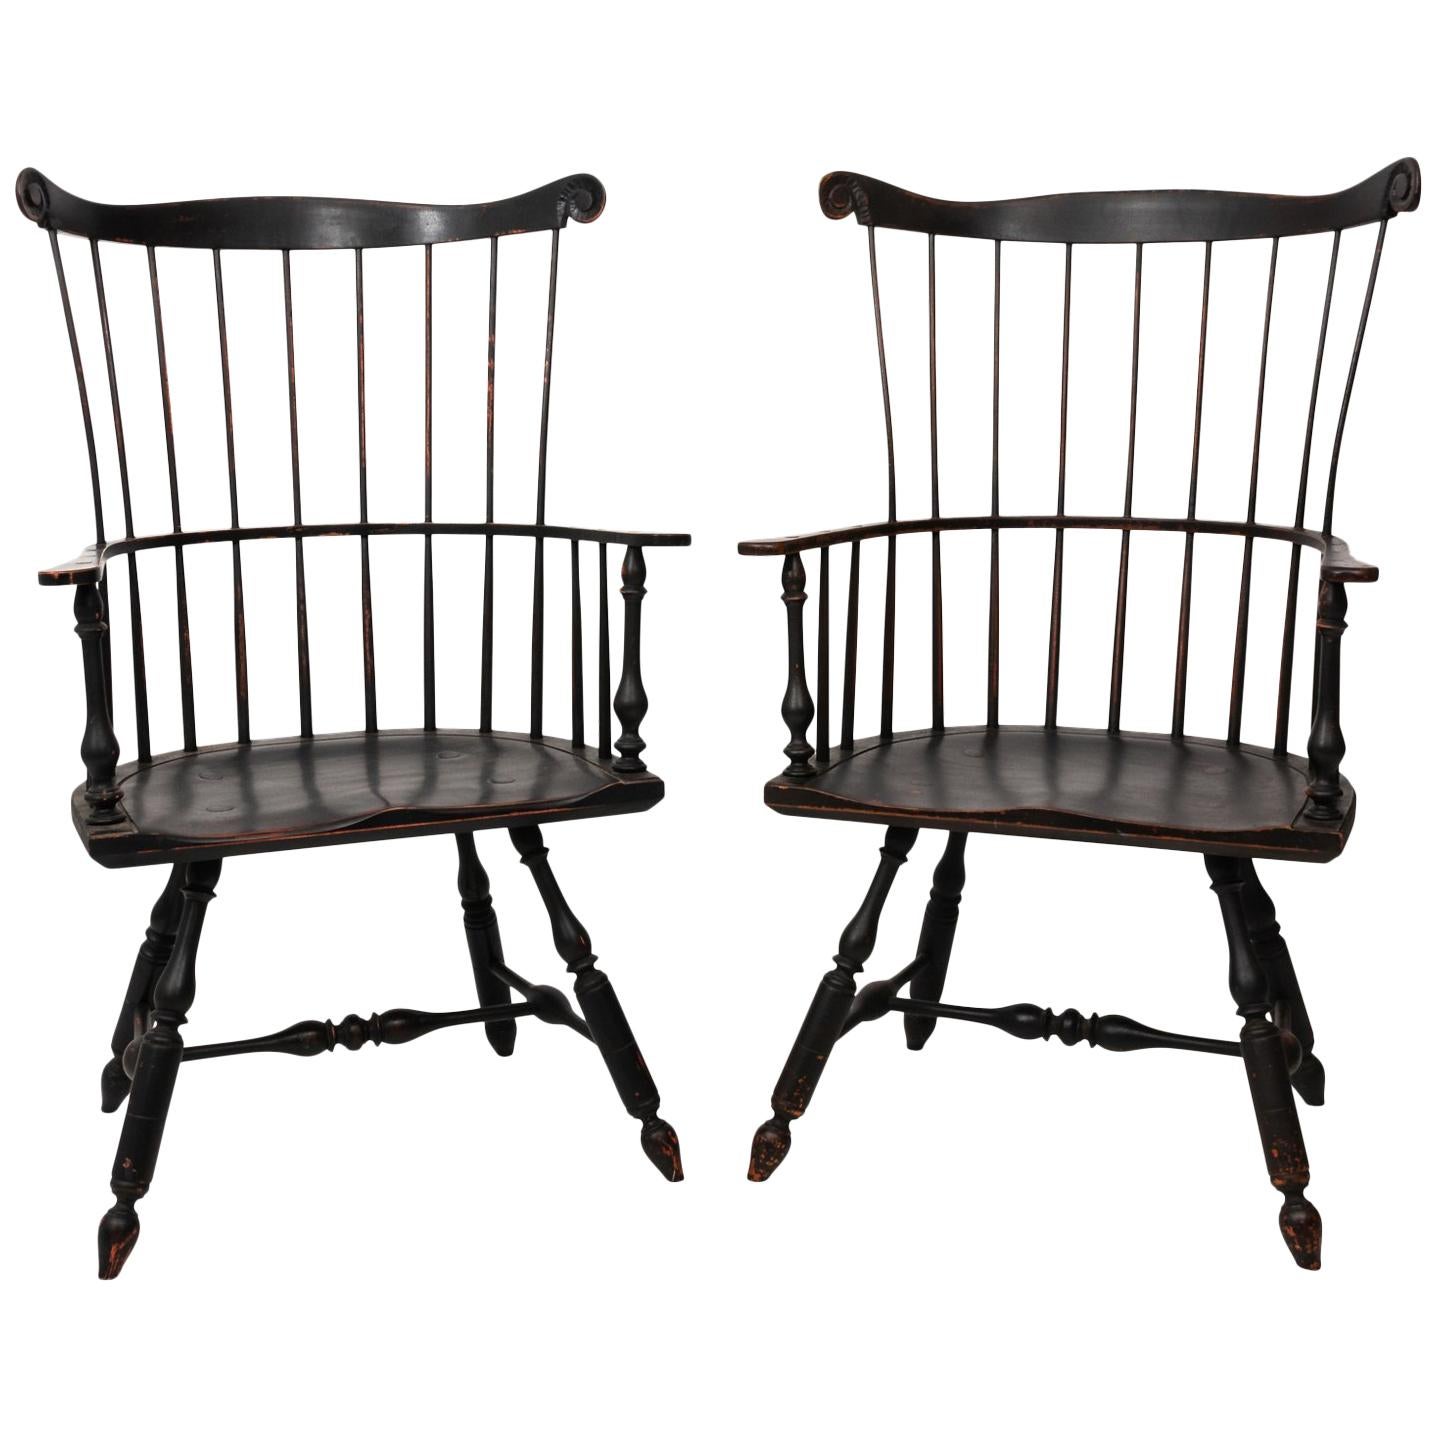 Pair of 20th Century Comb-Back Windsor Armchairs